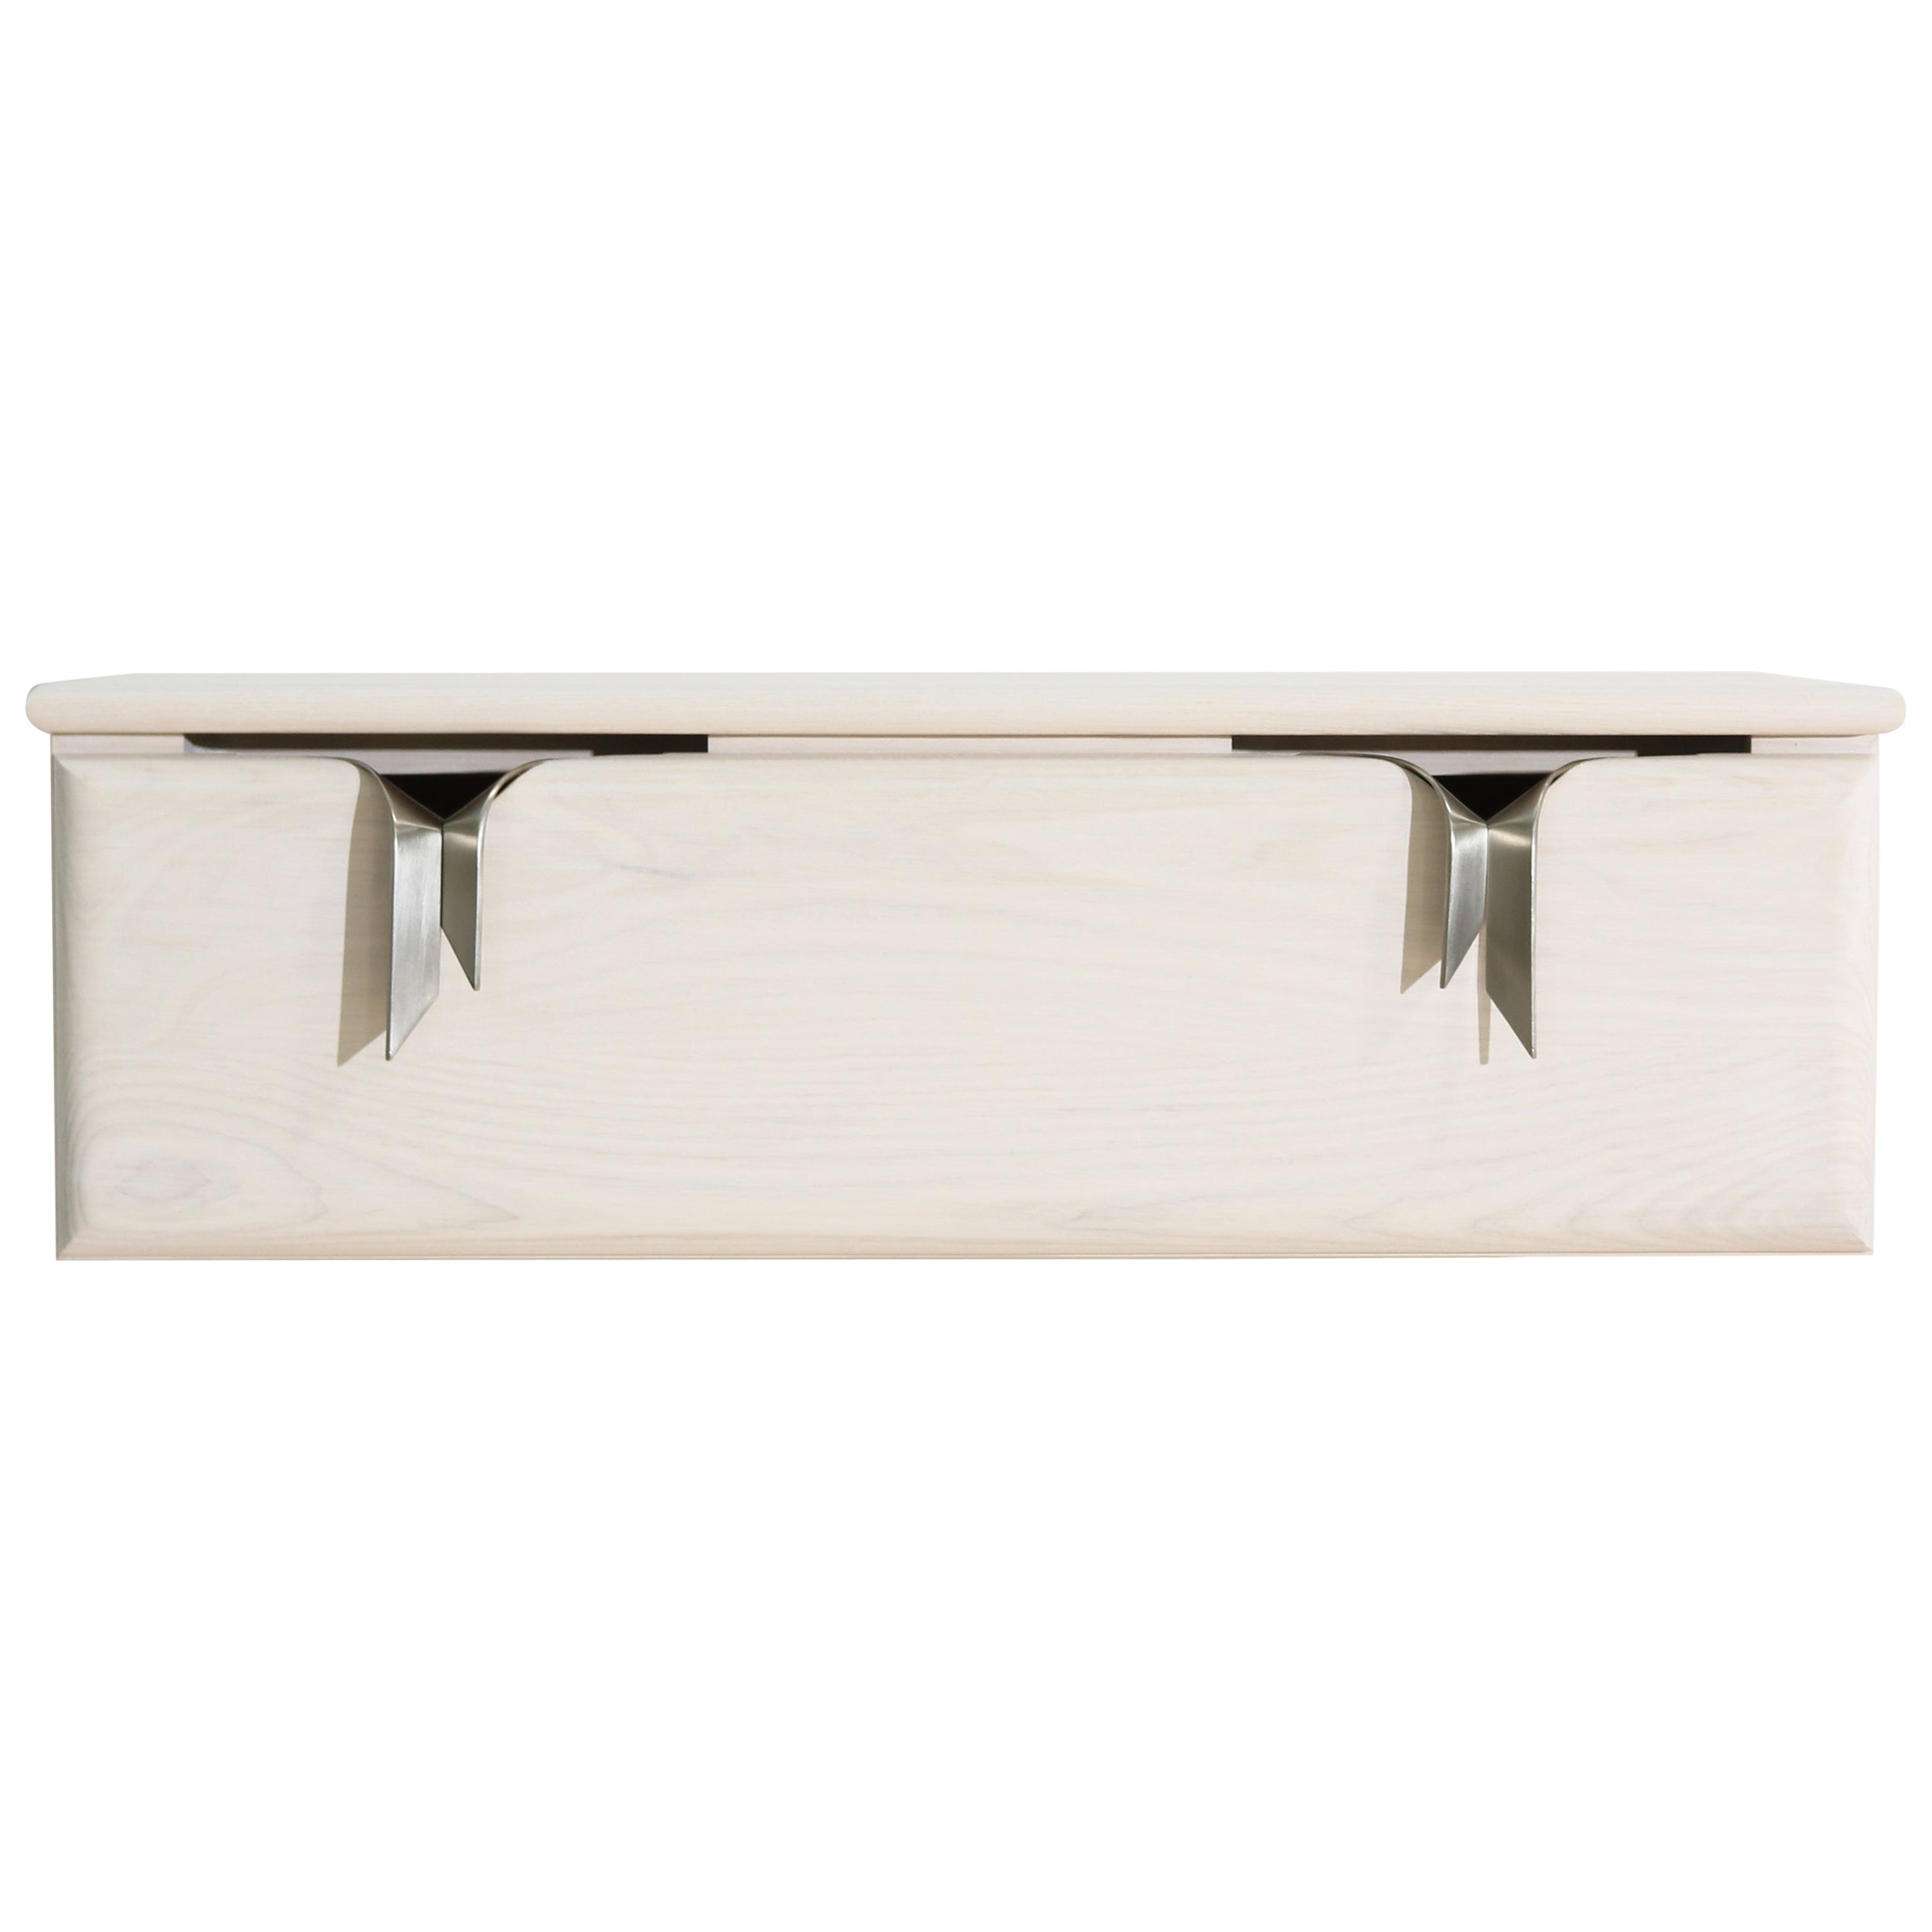 Ribbon Wall Mounted Console Drawer, Ivory Wood, Silver Hardware by Debra Folz For Sale